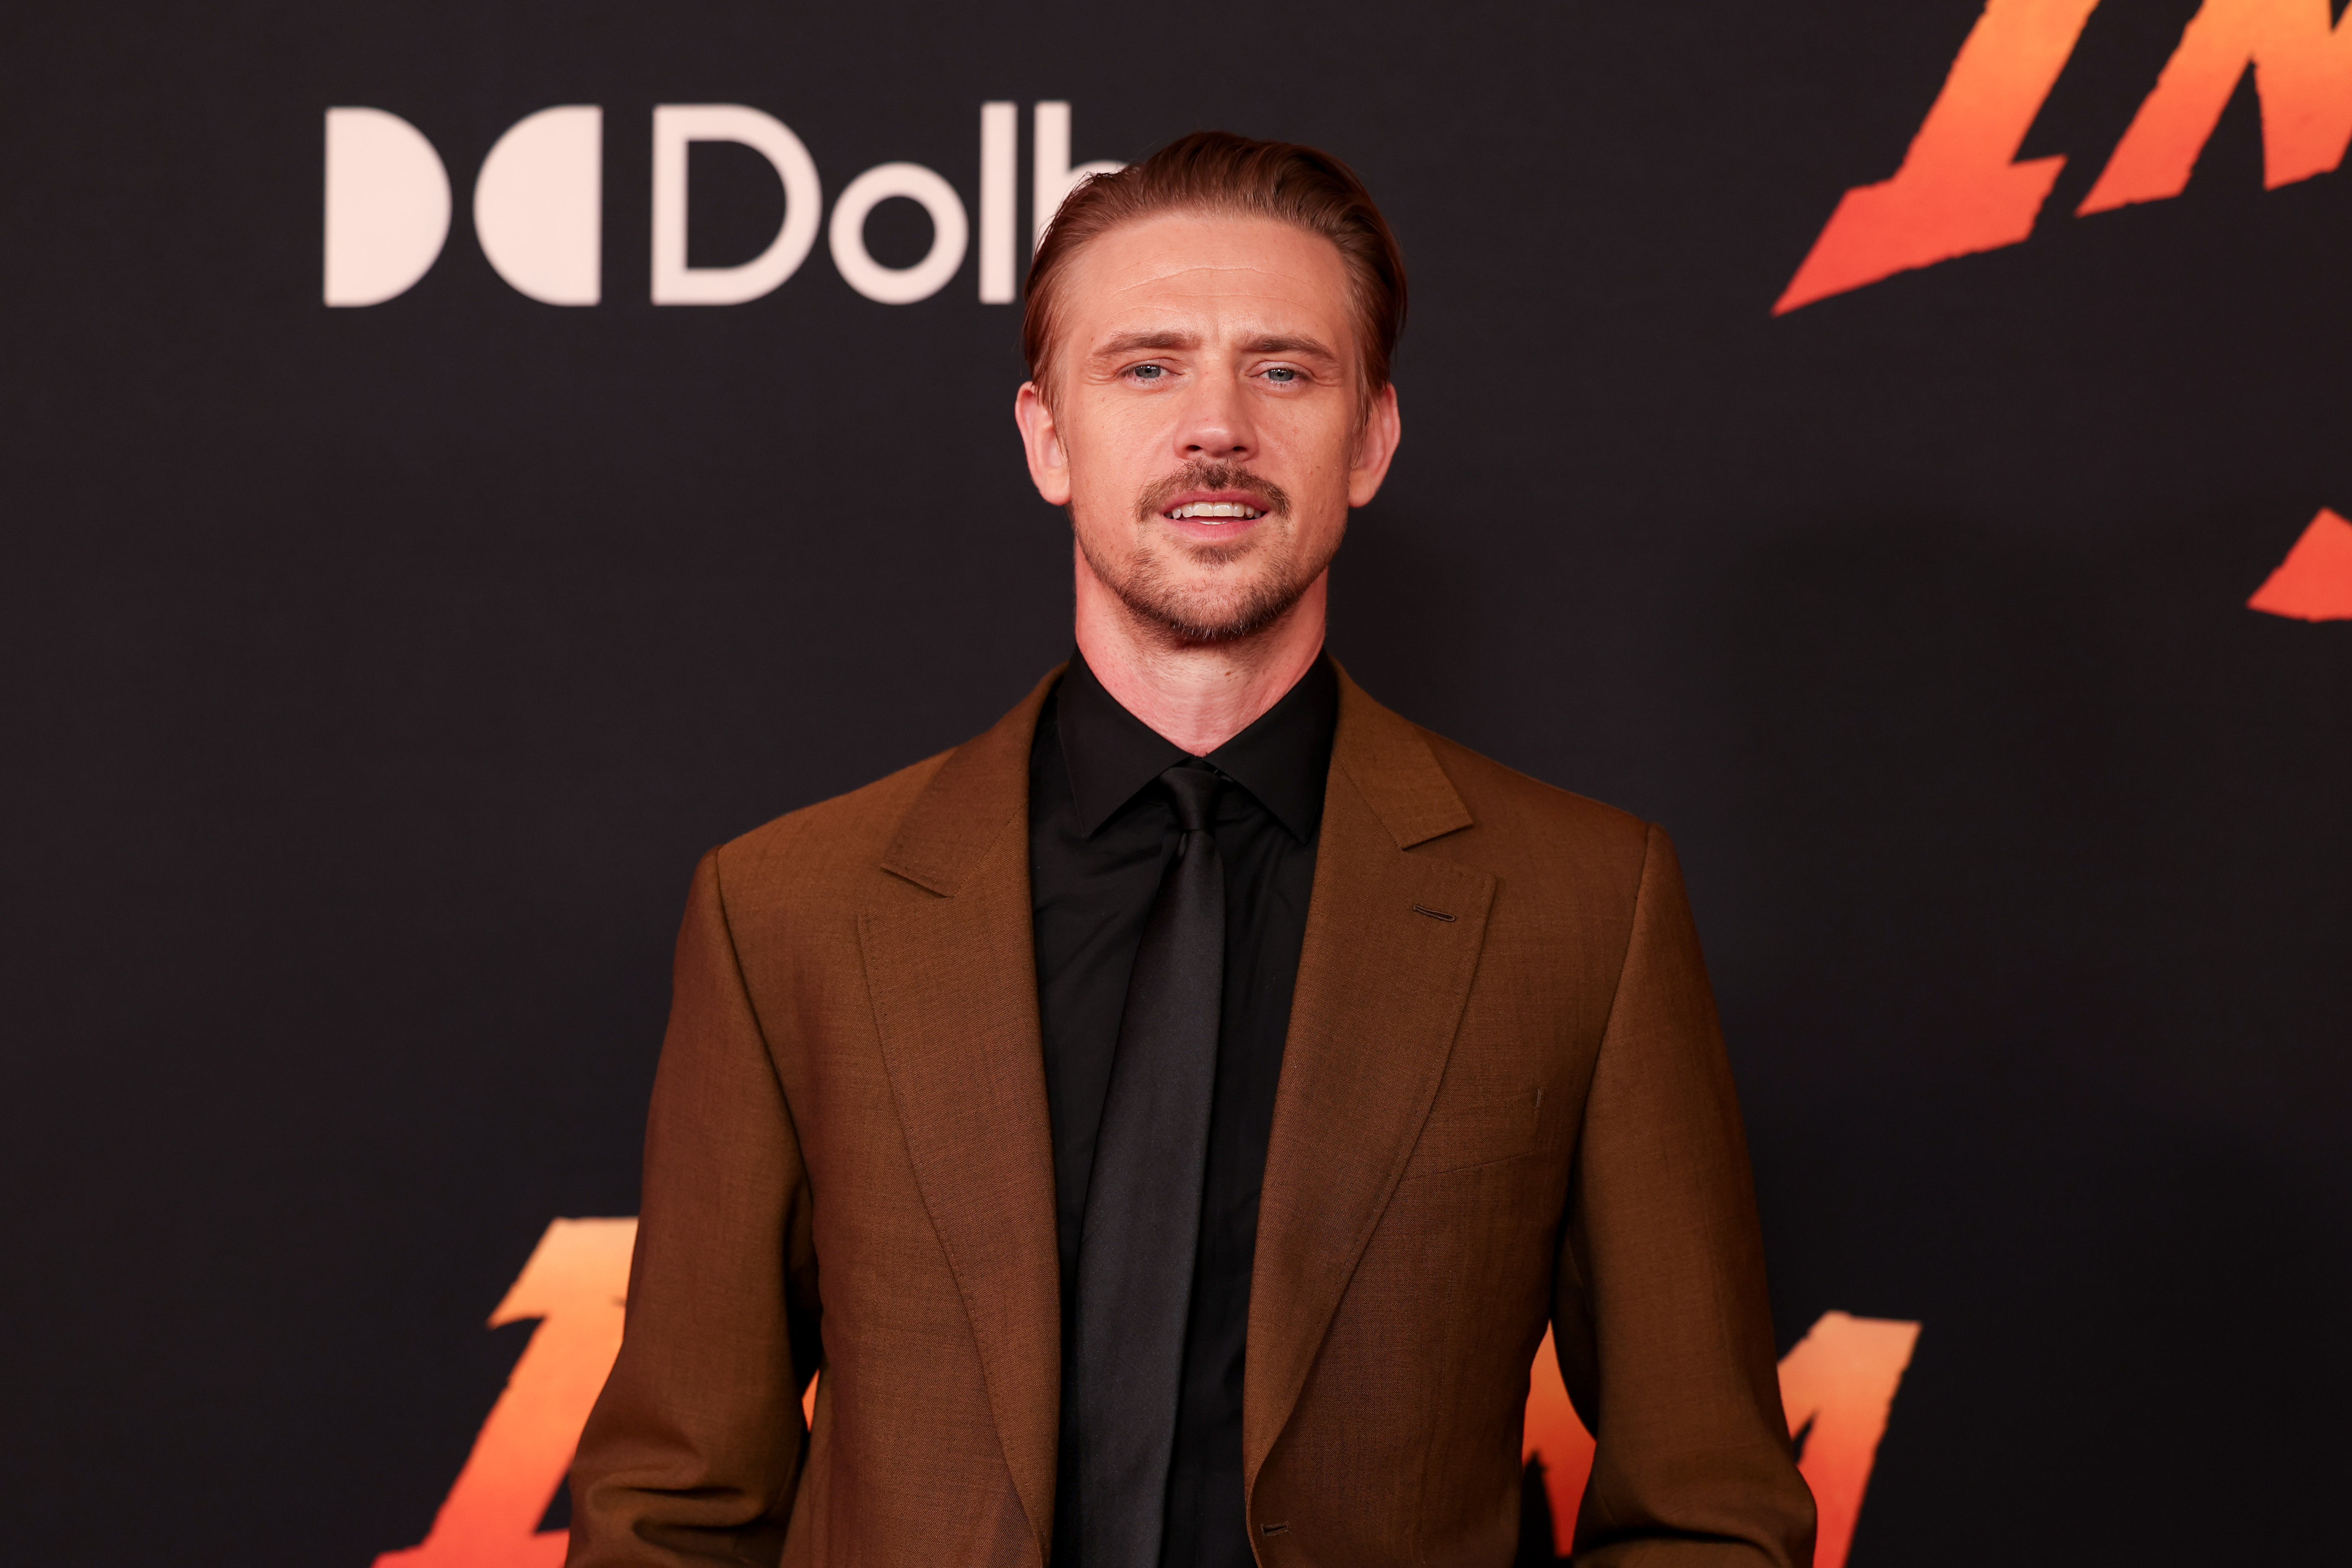 Boyd Holbrook at the Dolby Theatre on June 14, 2023, in Los Angeles, California. | Source: Getty Images